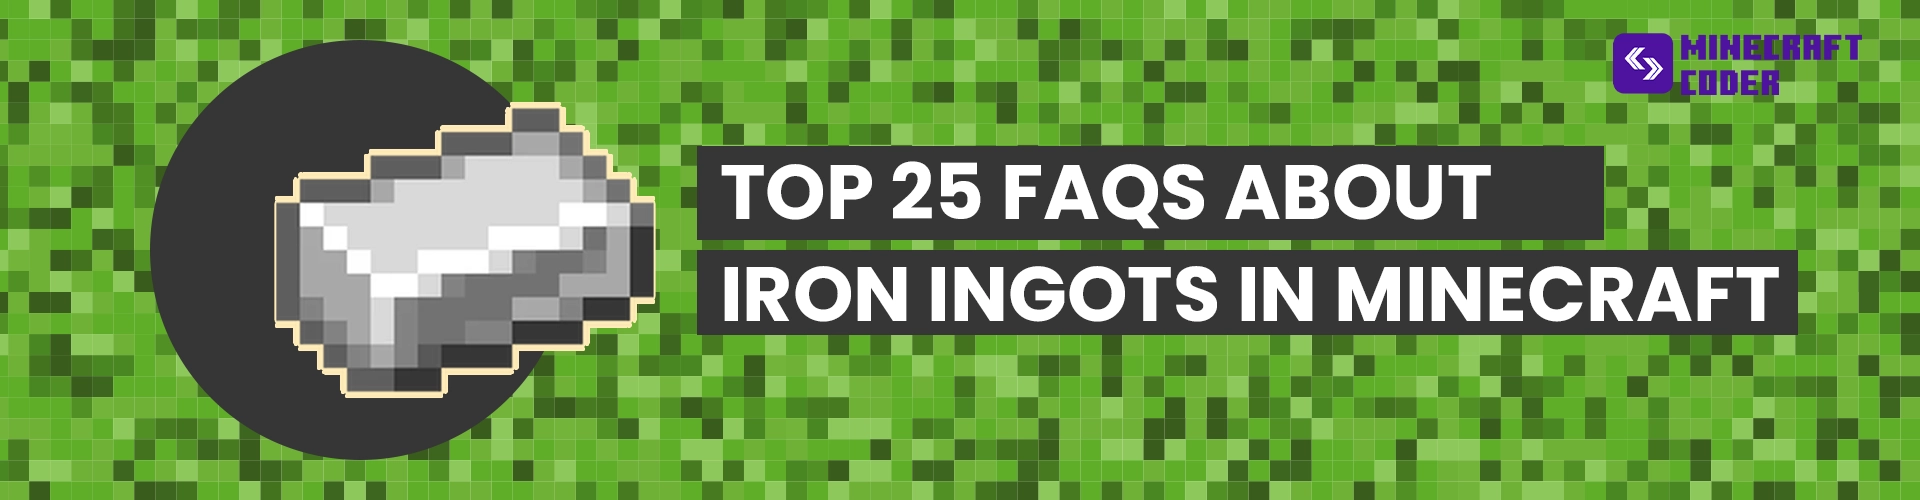 Top 25 FAQs About Iron Ingots in Minecraft